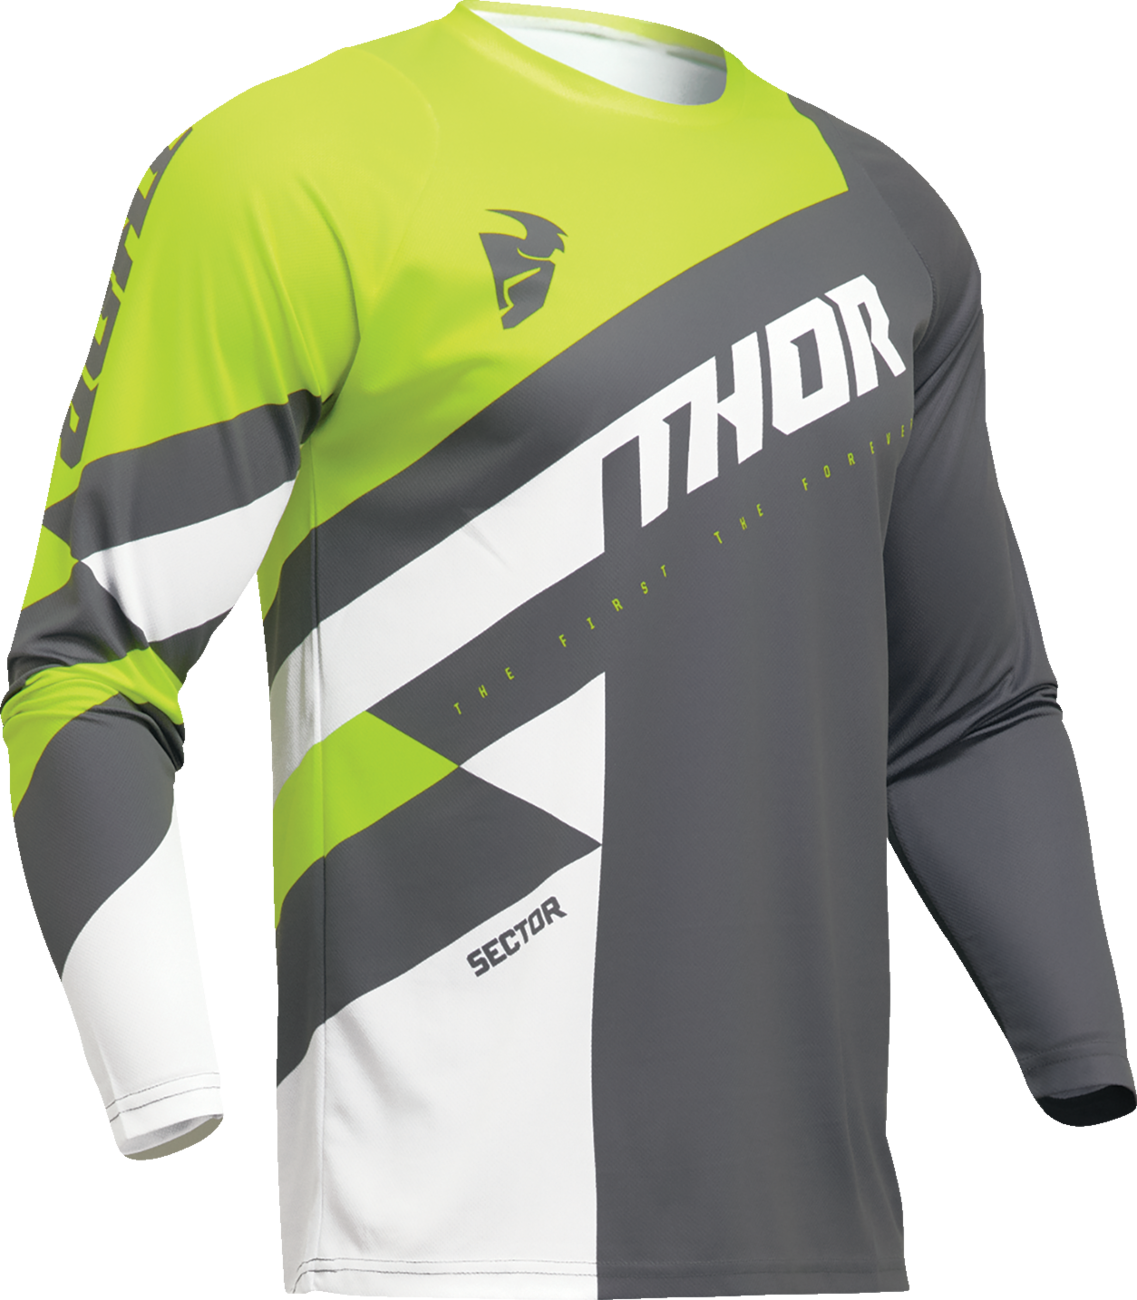 THOR Sector Checker Jersey - Gray/Acid - Small 2910-7594